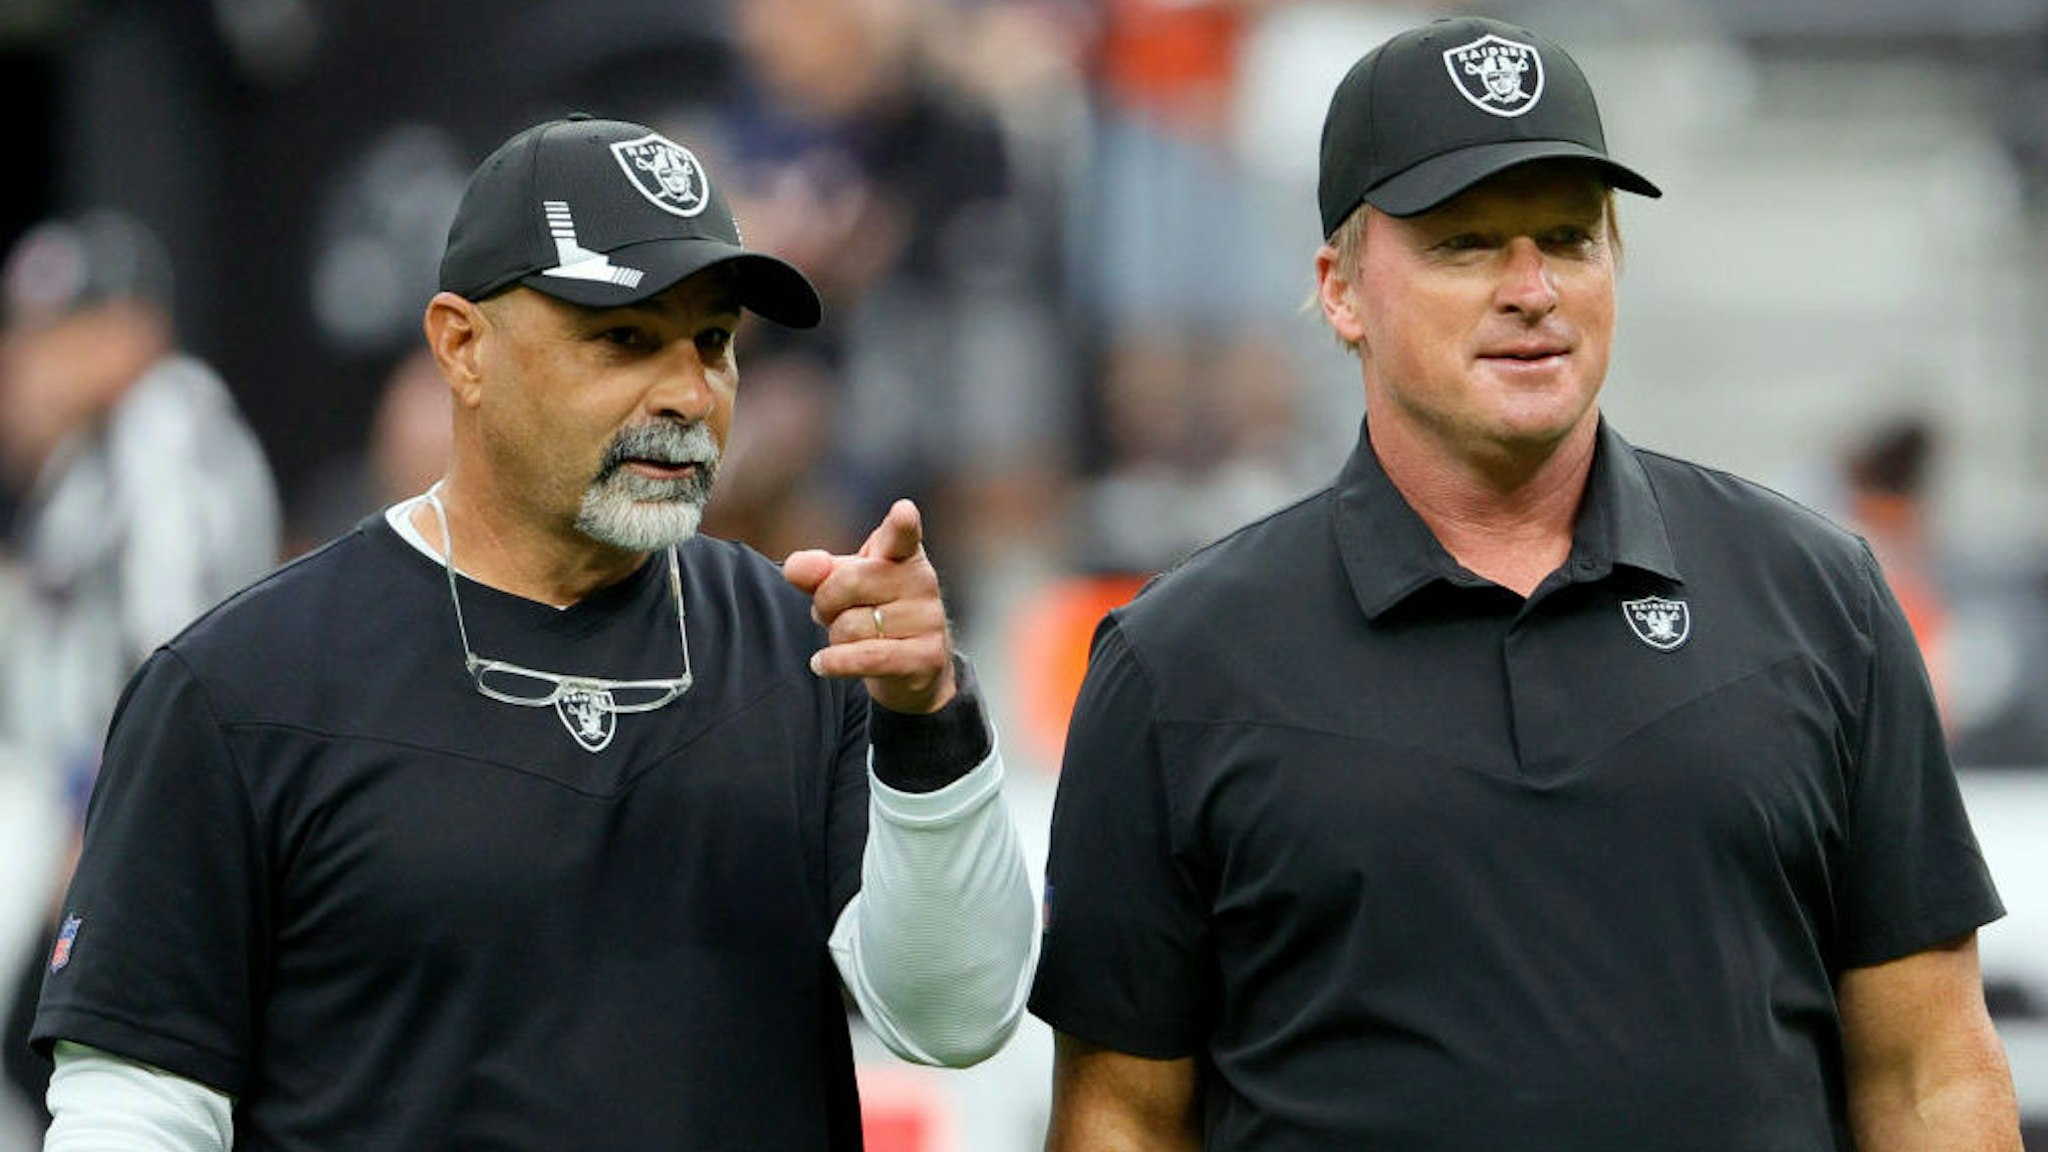 LAS VEGAS, NEVADA - OCTOBER 10: Assistant head coach/special teams coordinator Rich Bisaccia (L) and head coach Jon Gruden of the Las Vegas Raiders talk on the field before their game against the Chicago Bears at Allegiant Stadium on October 10, 2021 in Las Vegas, Nevada. The Bears defeated the Raiders 20-9. (Photo by Ethan Miller/Getty Images)